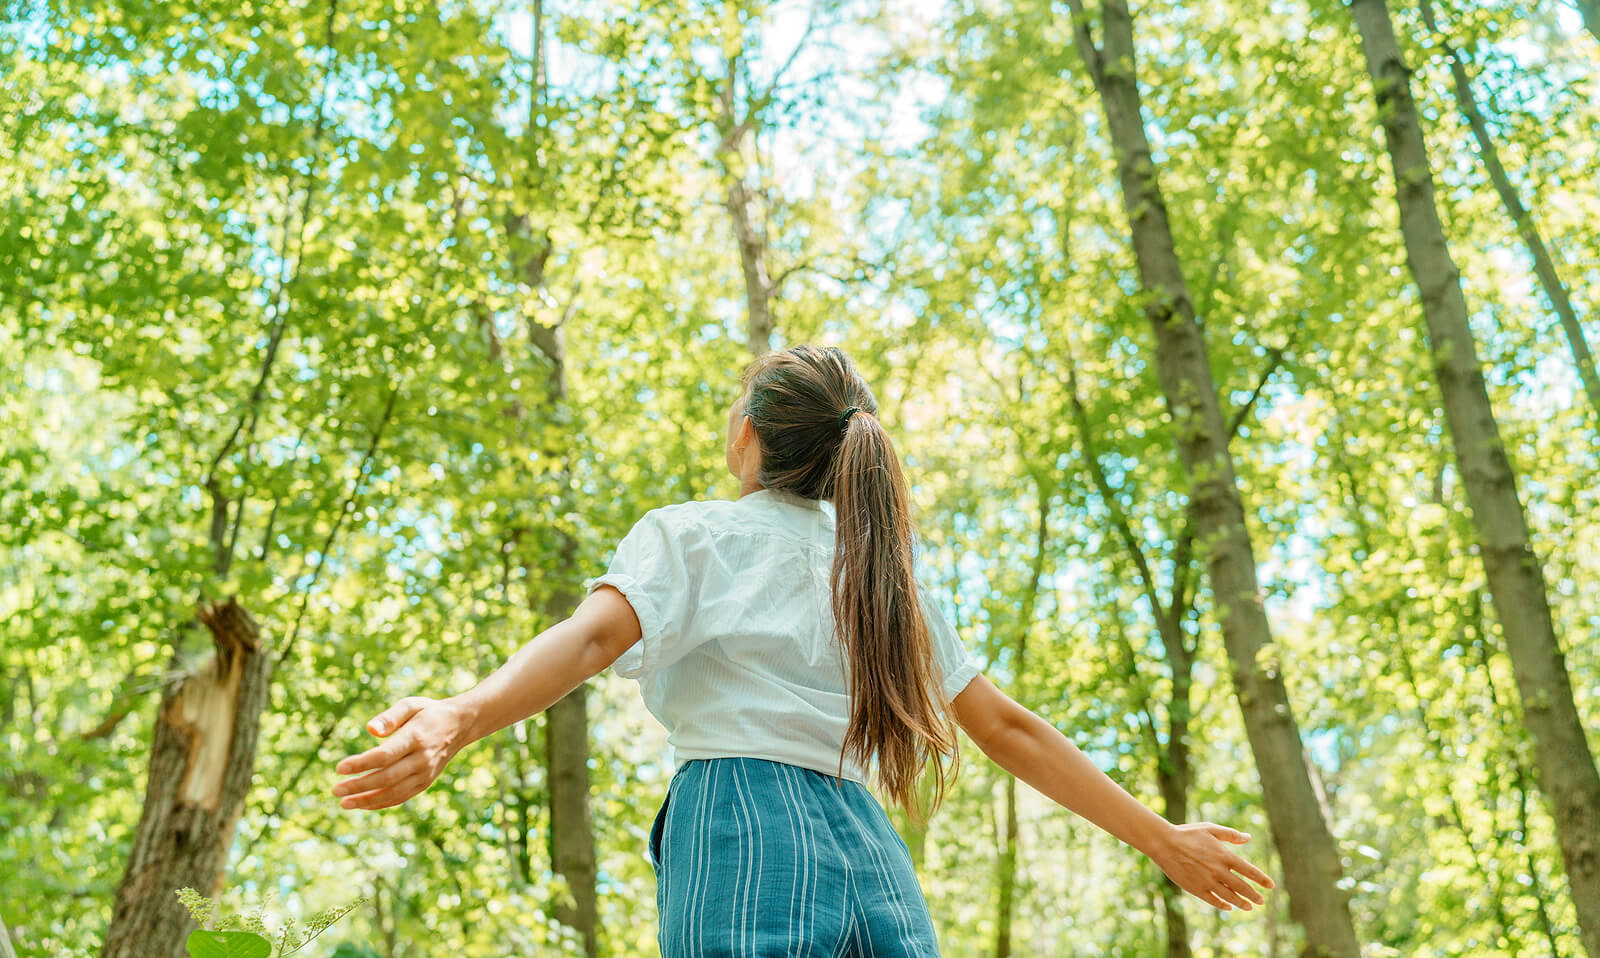 Photo of a woman standing in the woods with her arm outstretched. Are you suffering from anorexia? Learn how anorexia nervosa treatment in Georgia can help provide you support and guidance to recover.